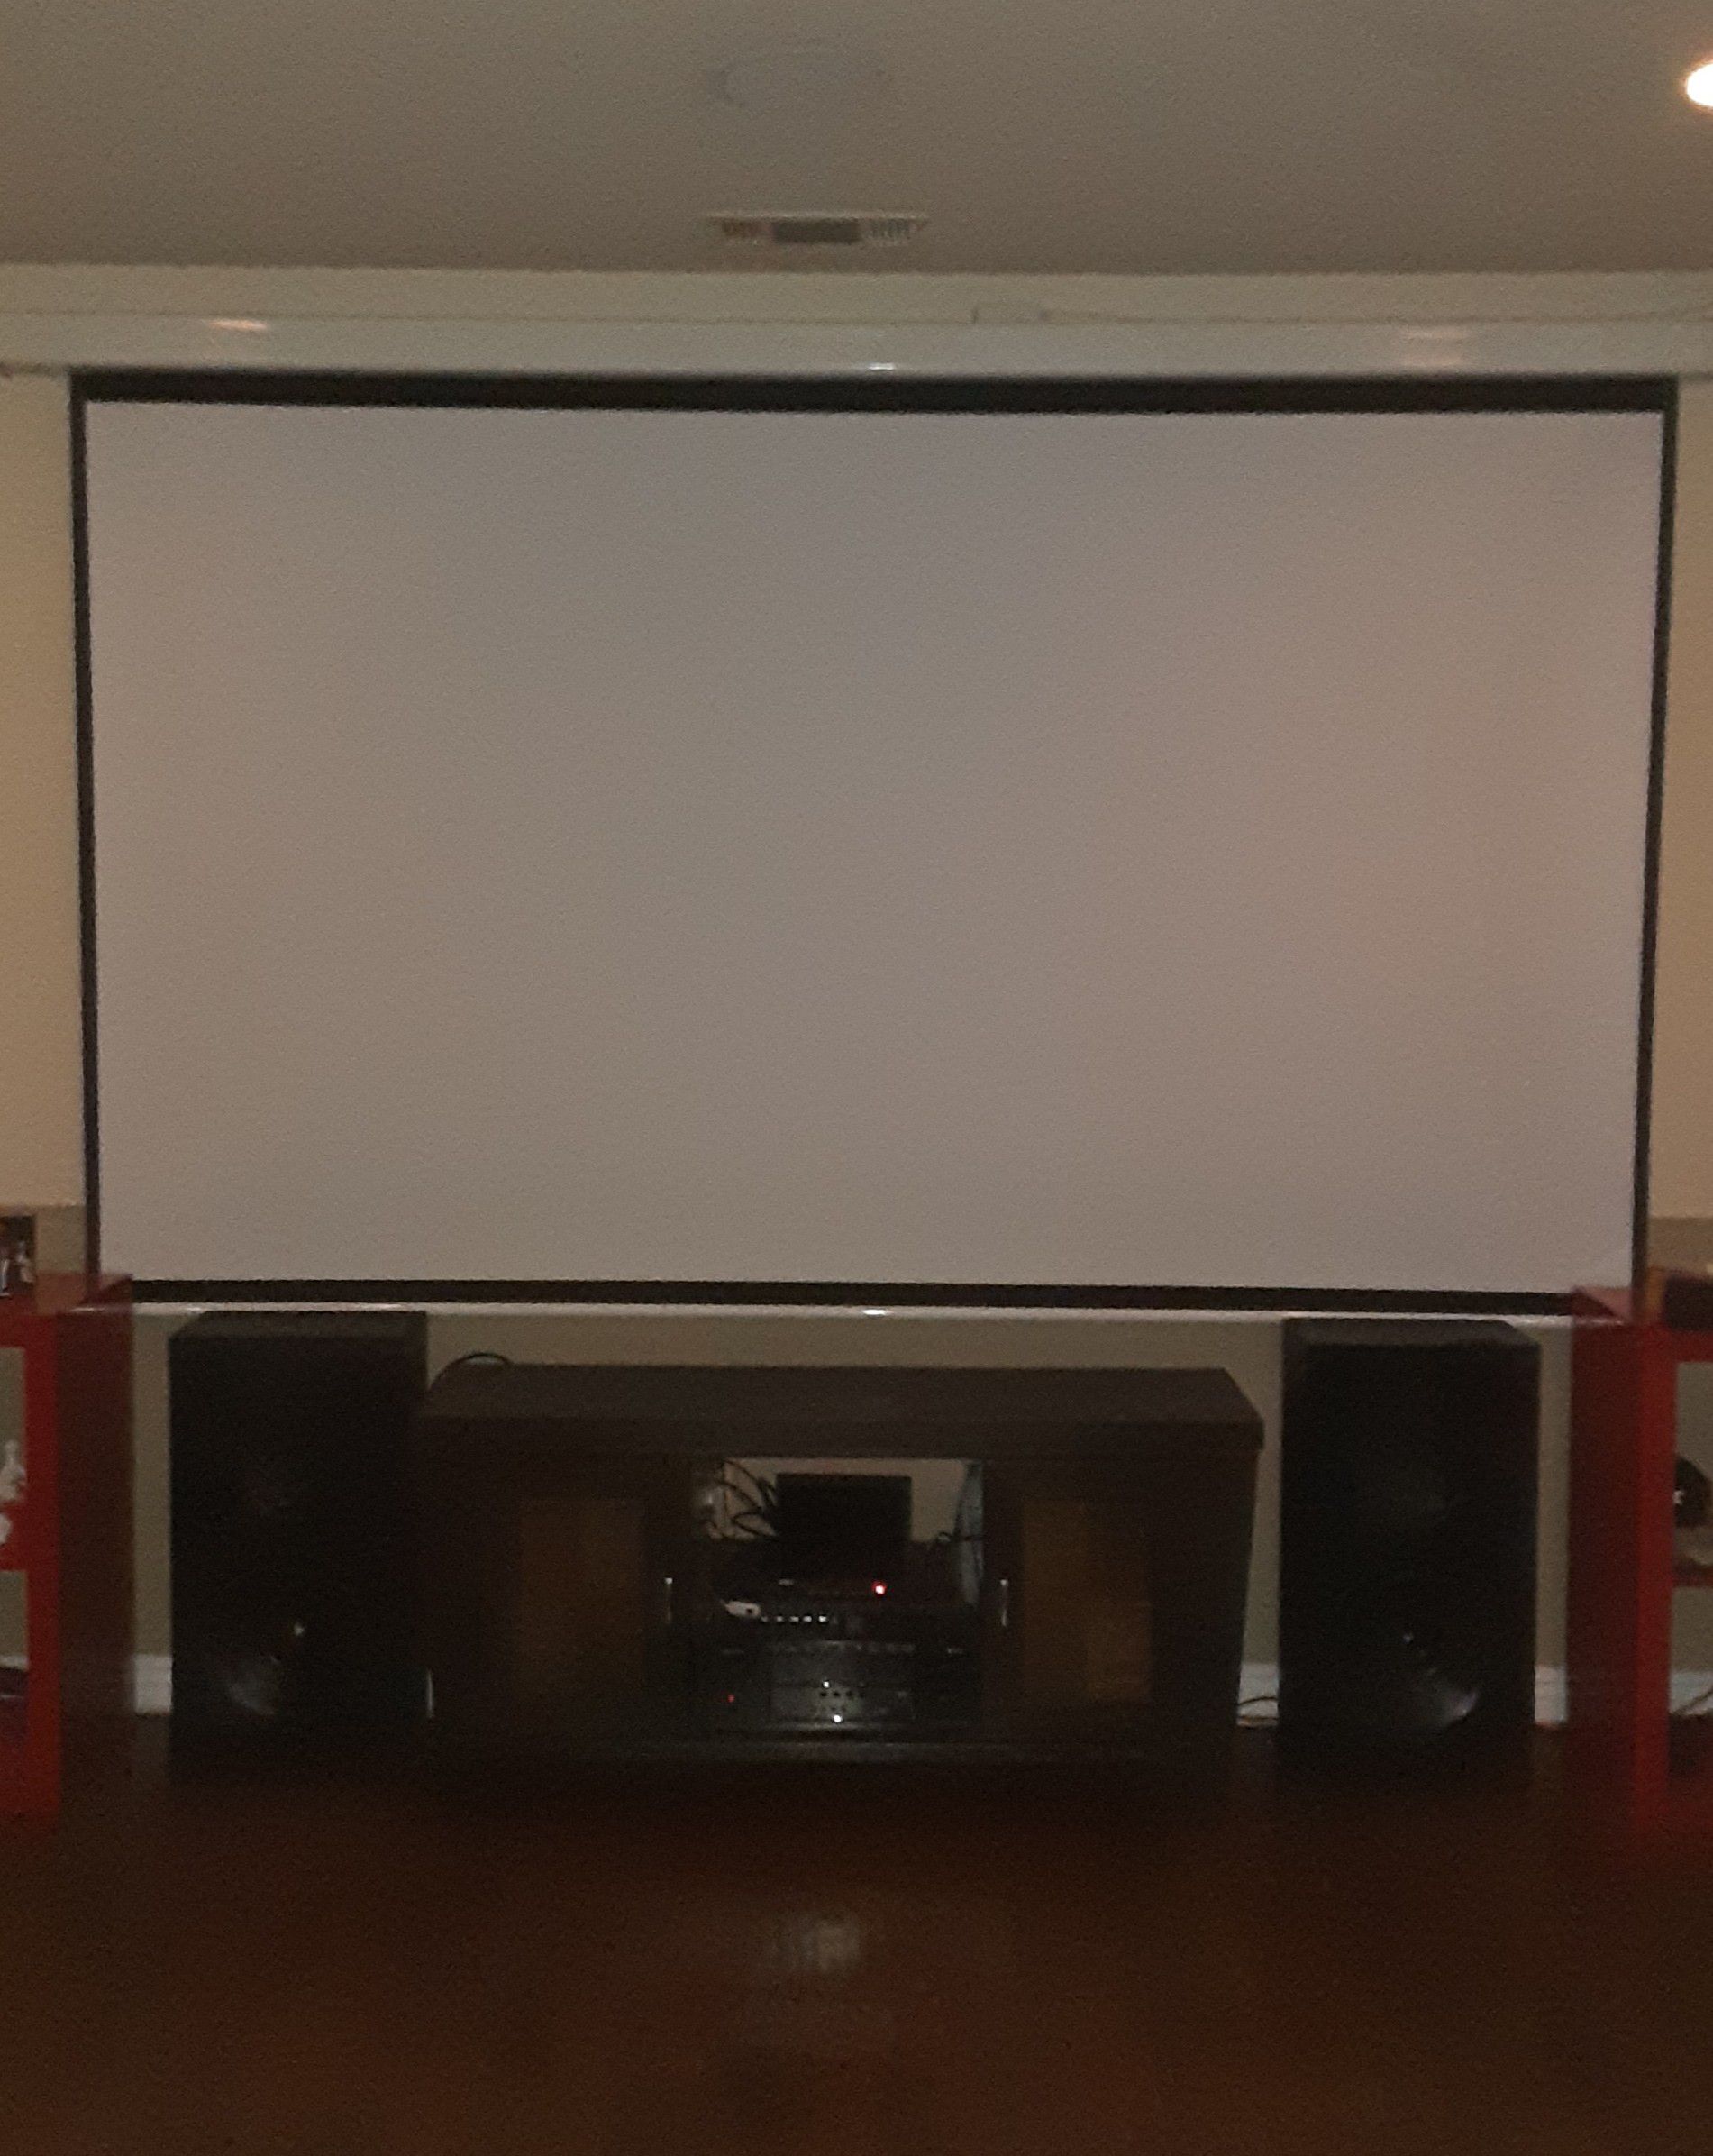 120" drop down movie screen with remote